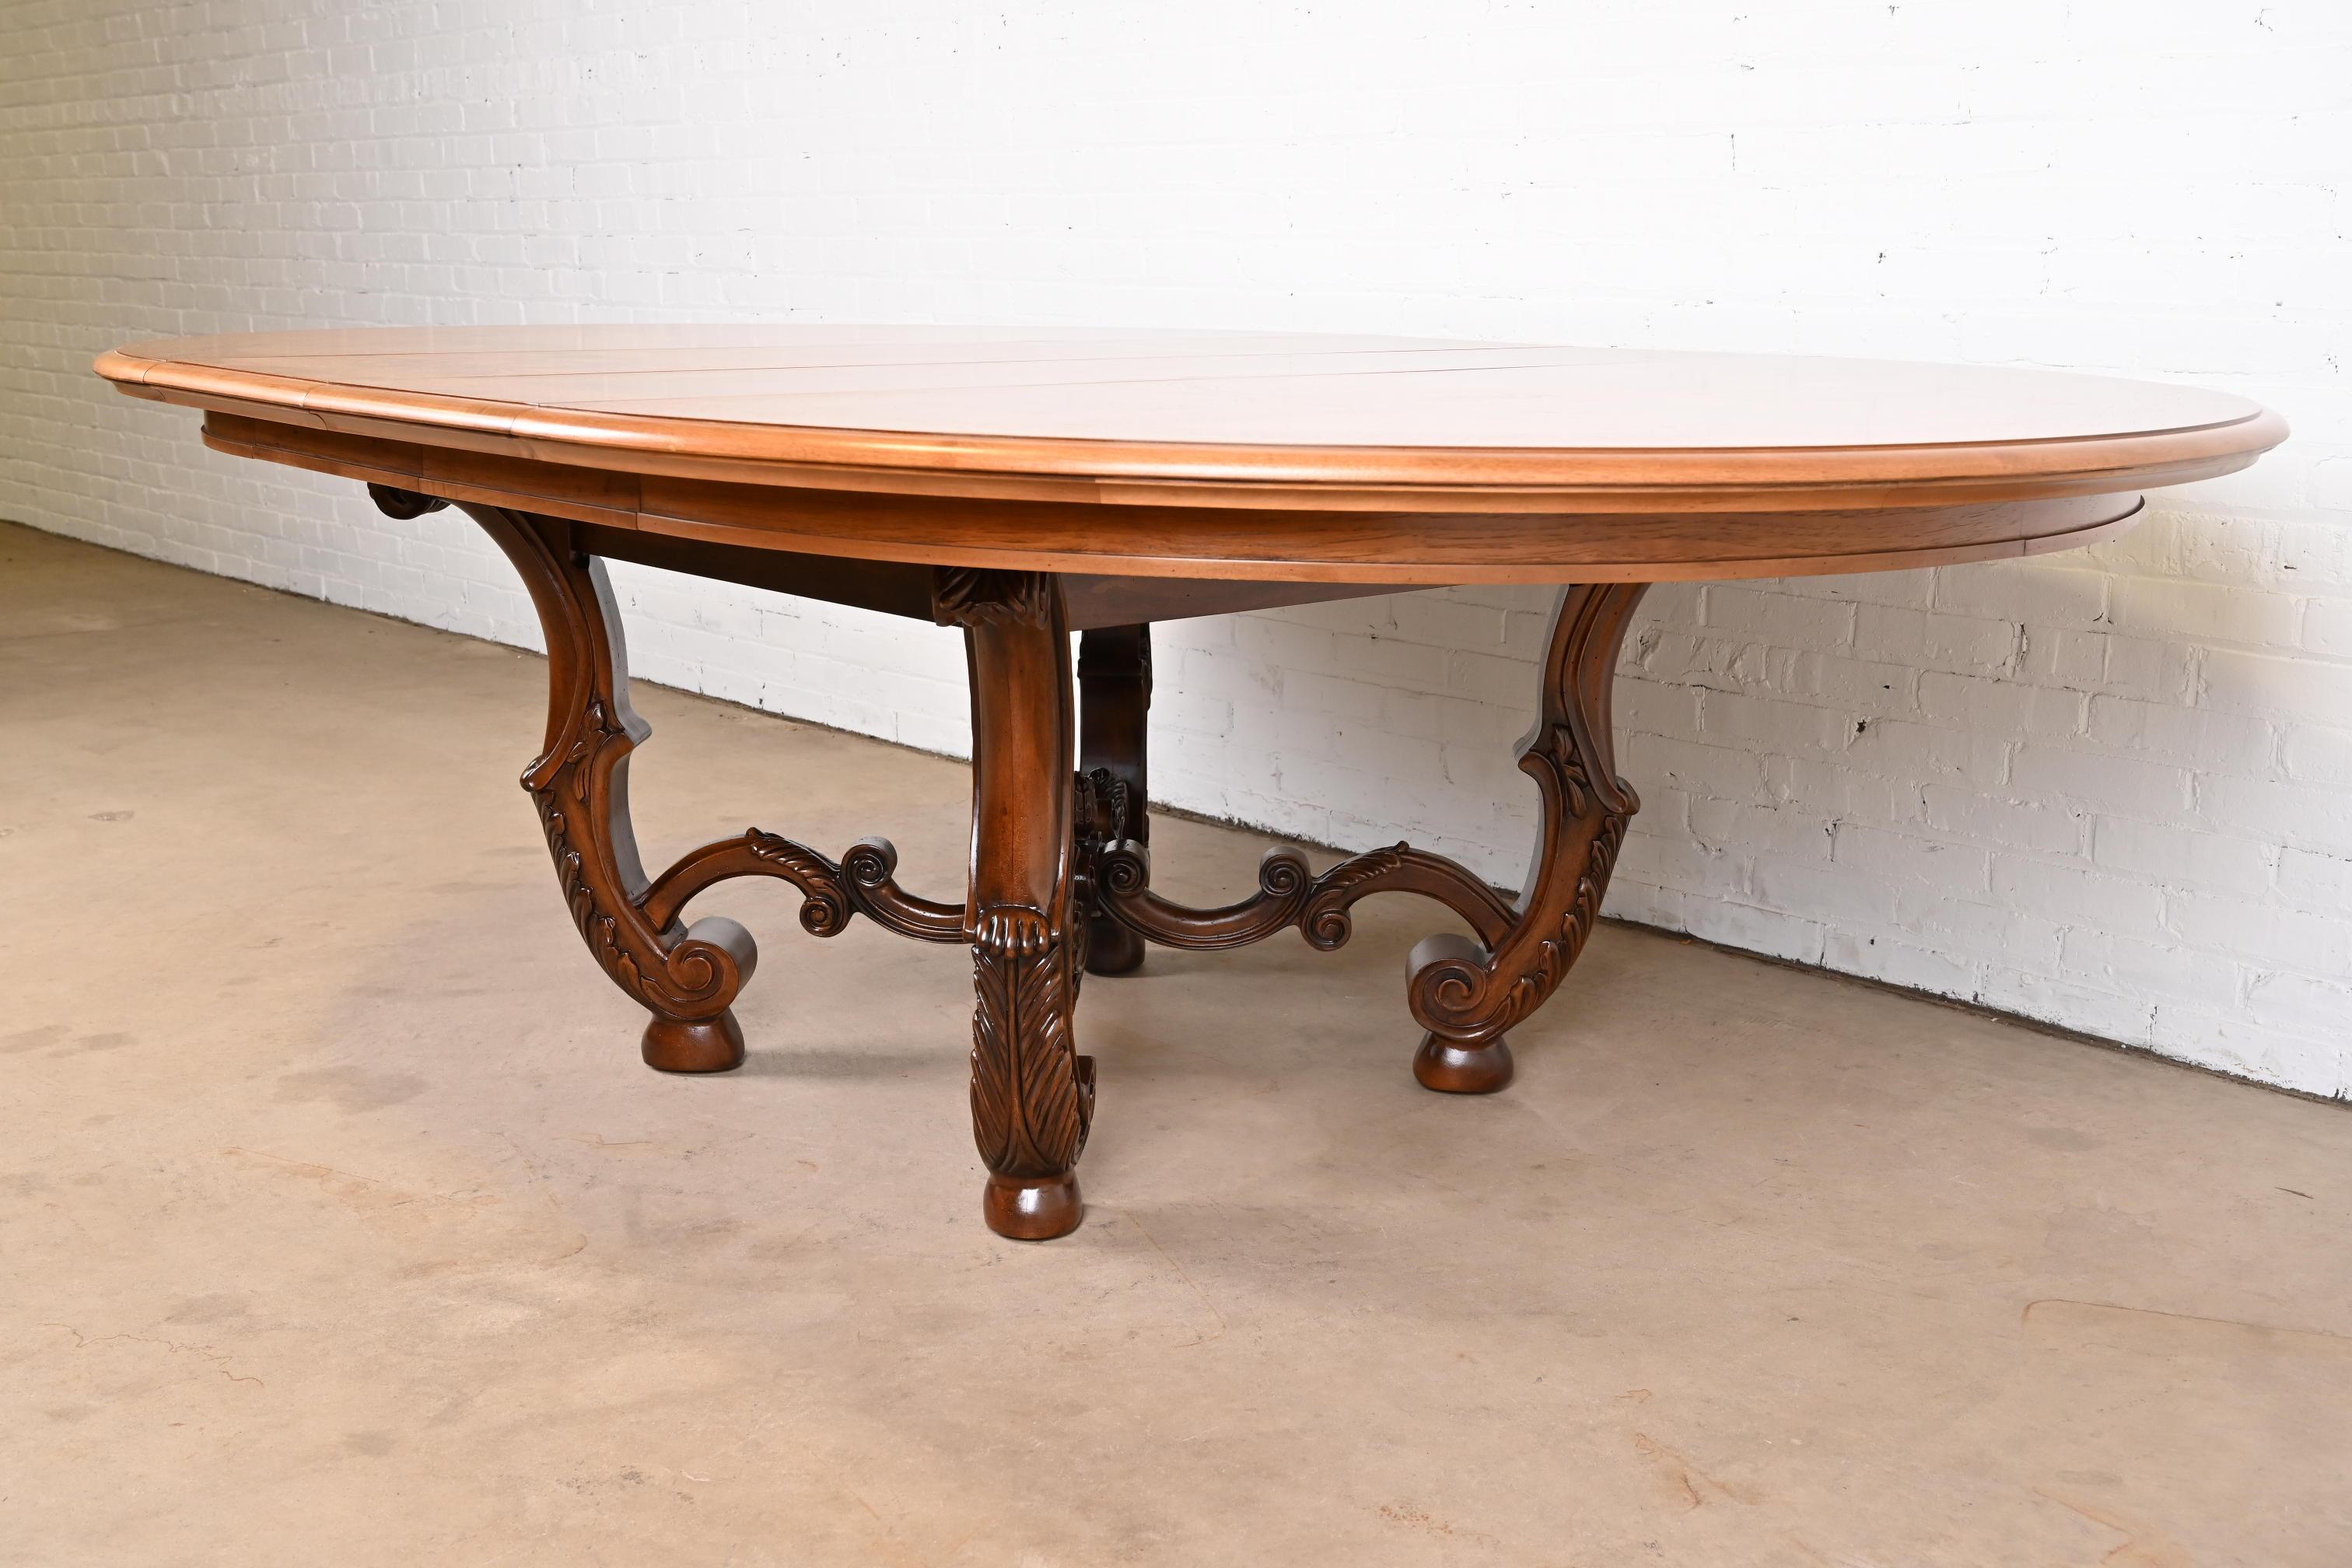 Henredon Italian Provincial Carved Walnut and Burl Wood Pedestal Dining Table In Good Condition For Sale In South Bend, IN